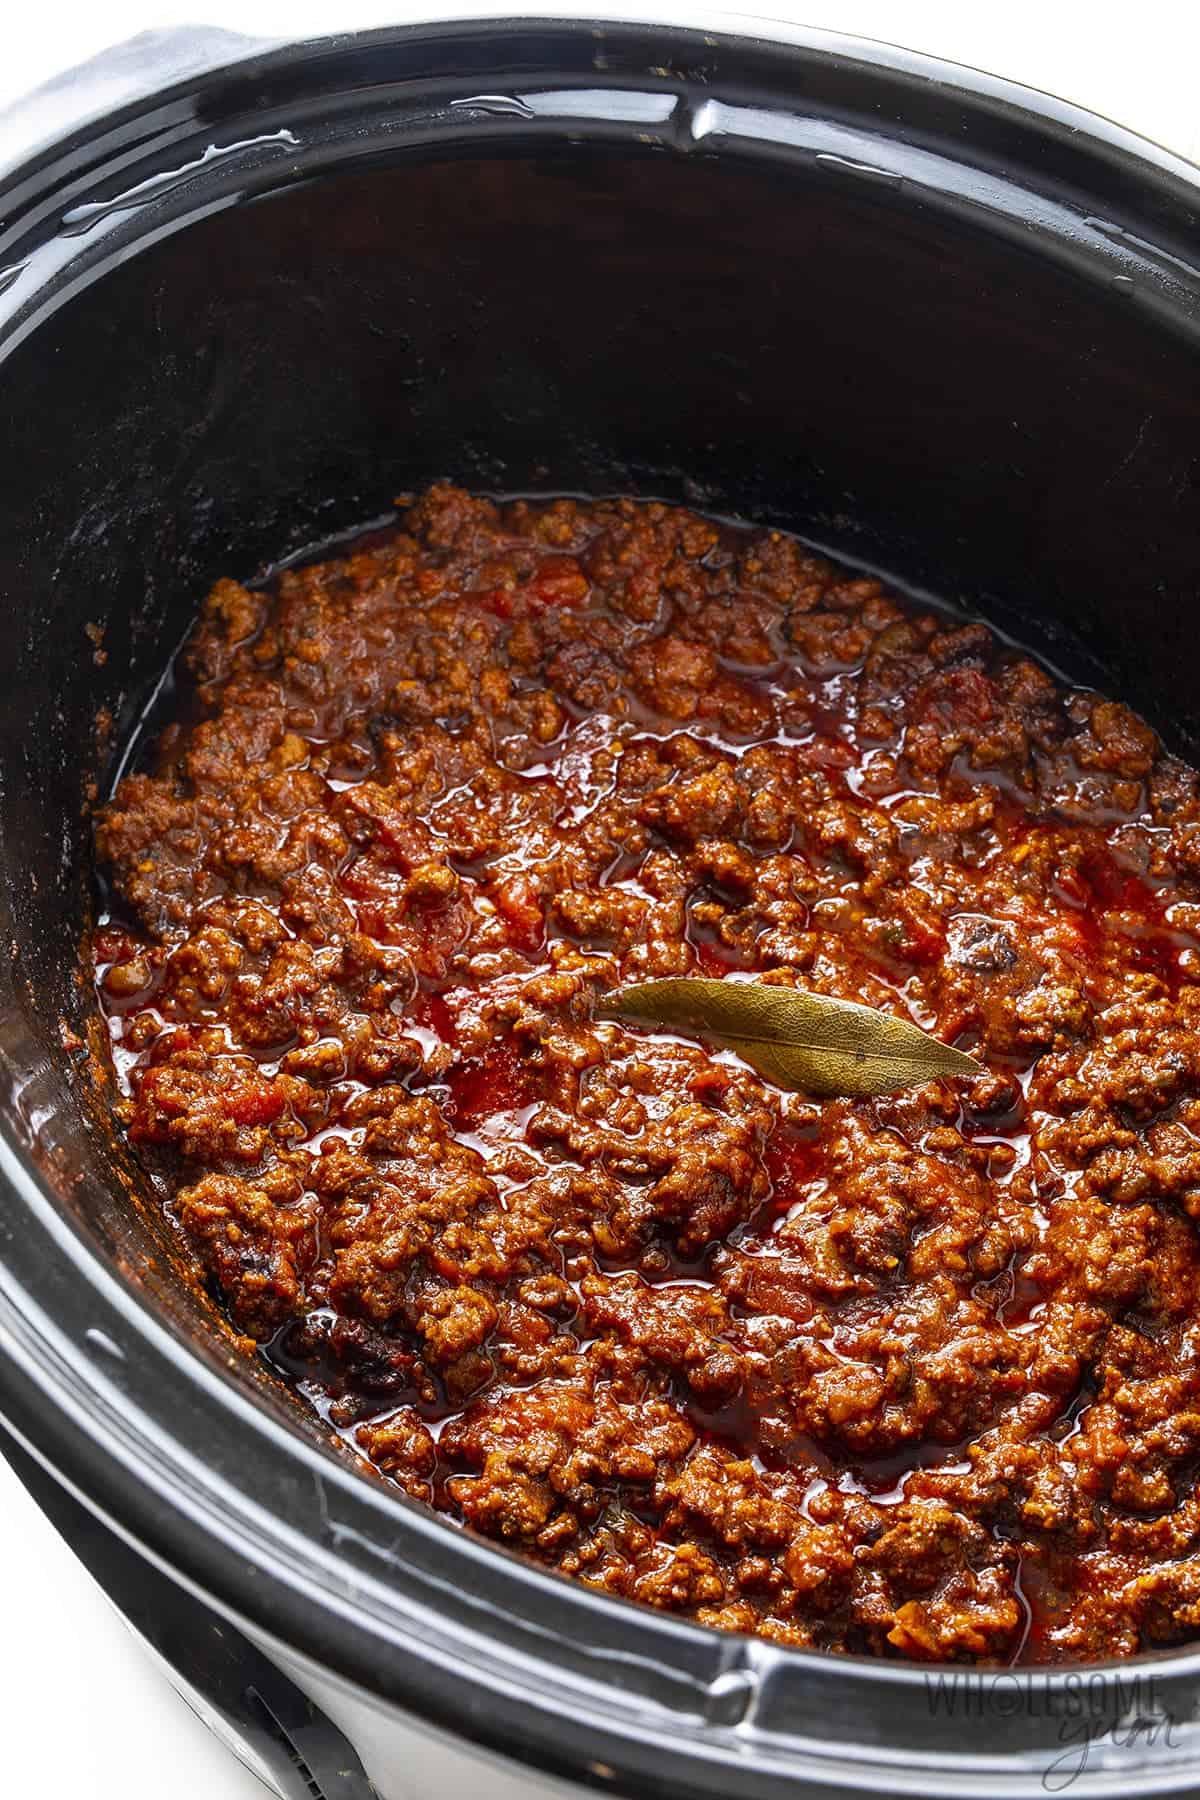 Keto chili in a slow cooker